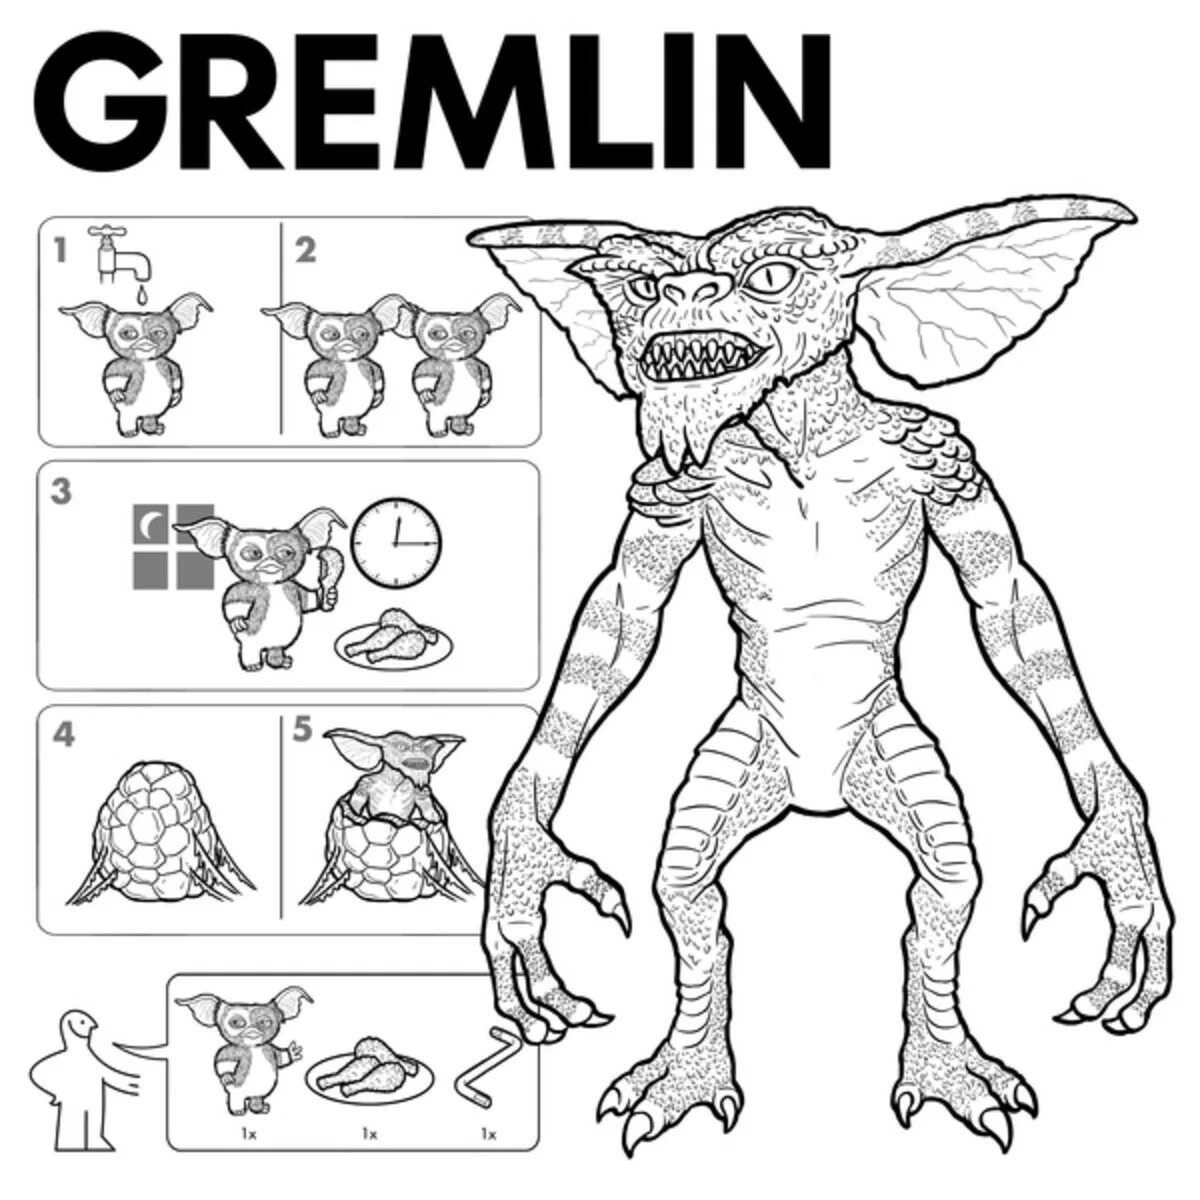 Gremlins amazing coloring pages